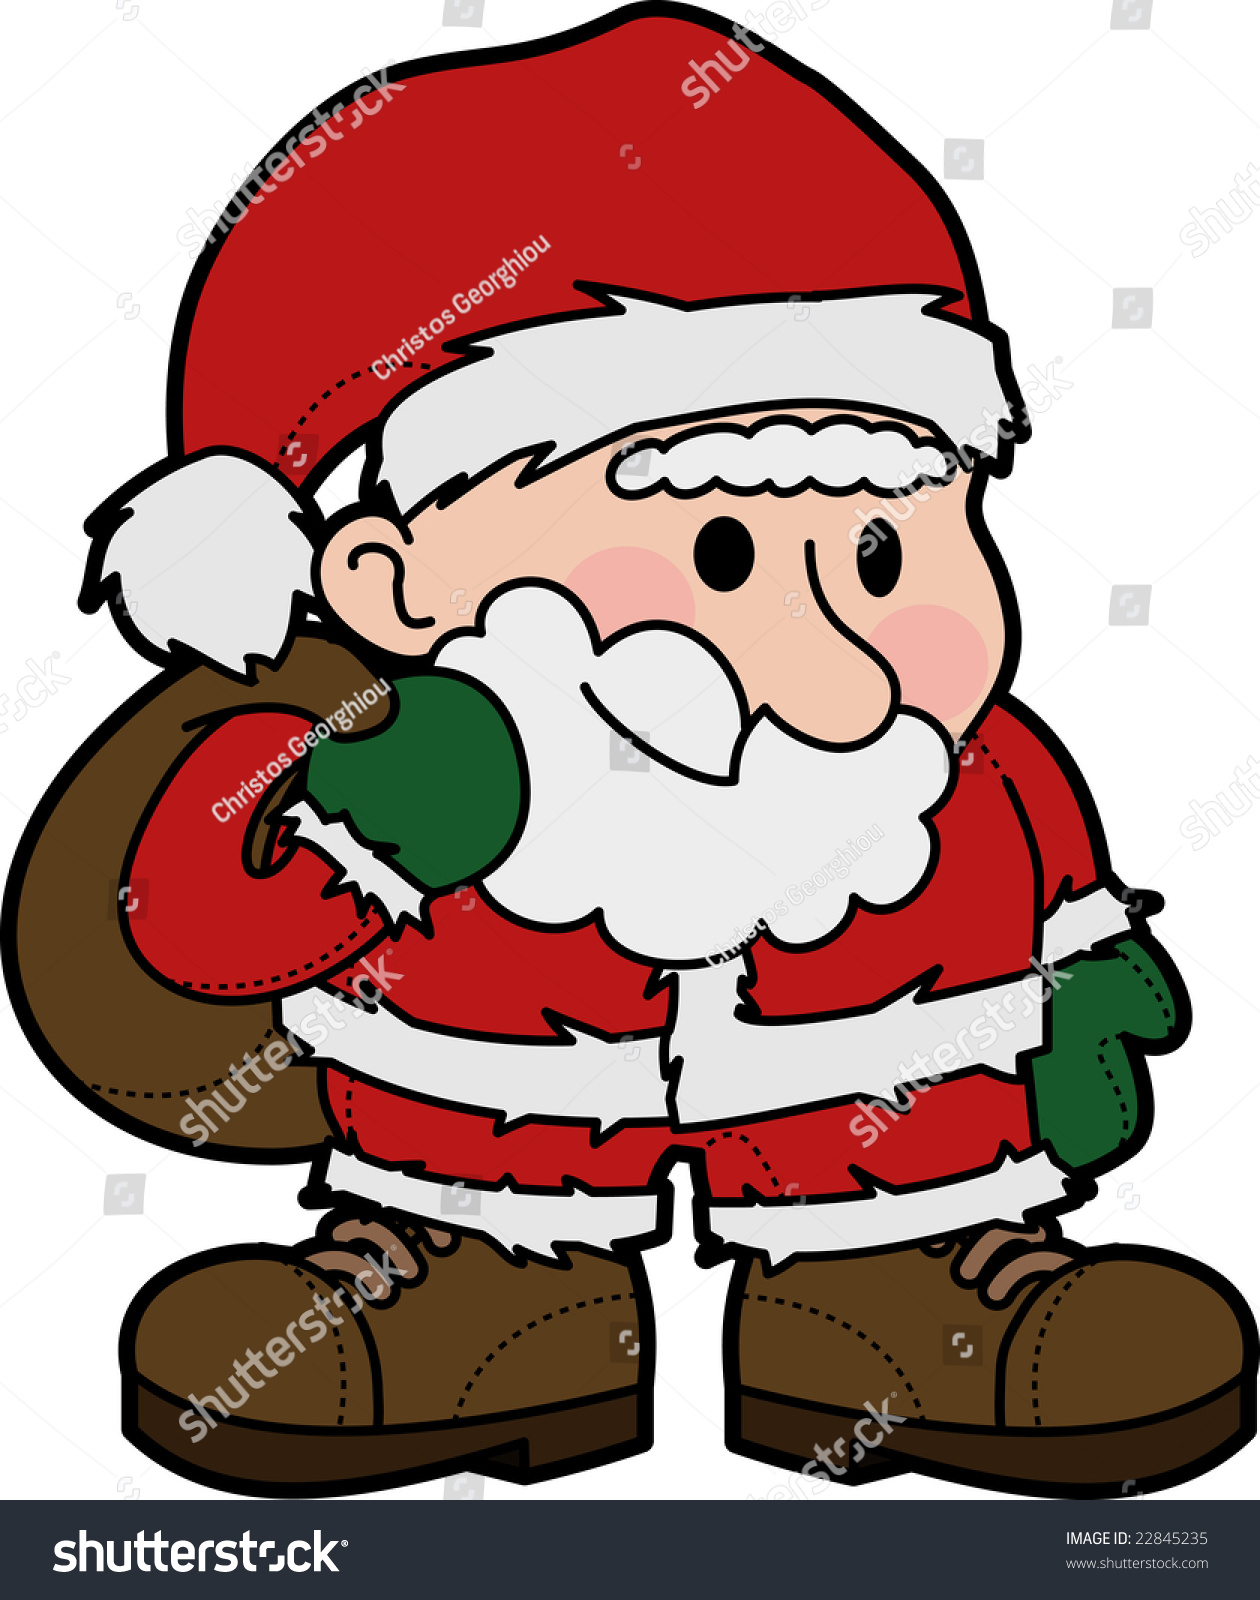 Illustration Of Father Christmas In Santa Claus Outfit - 22845235